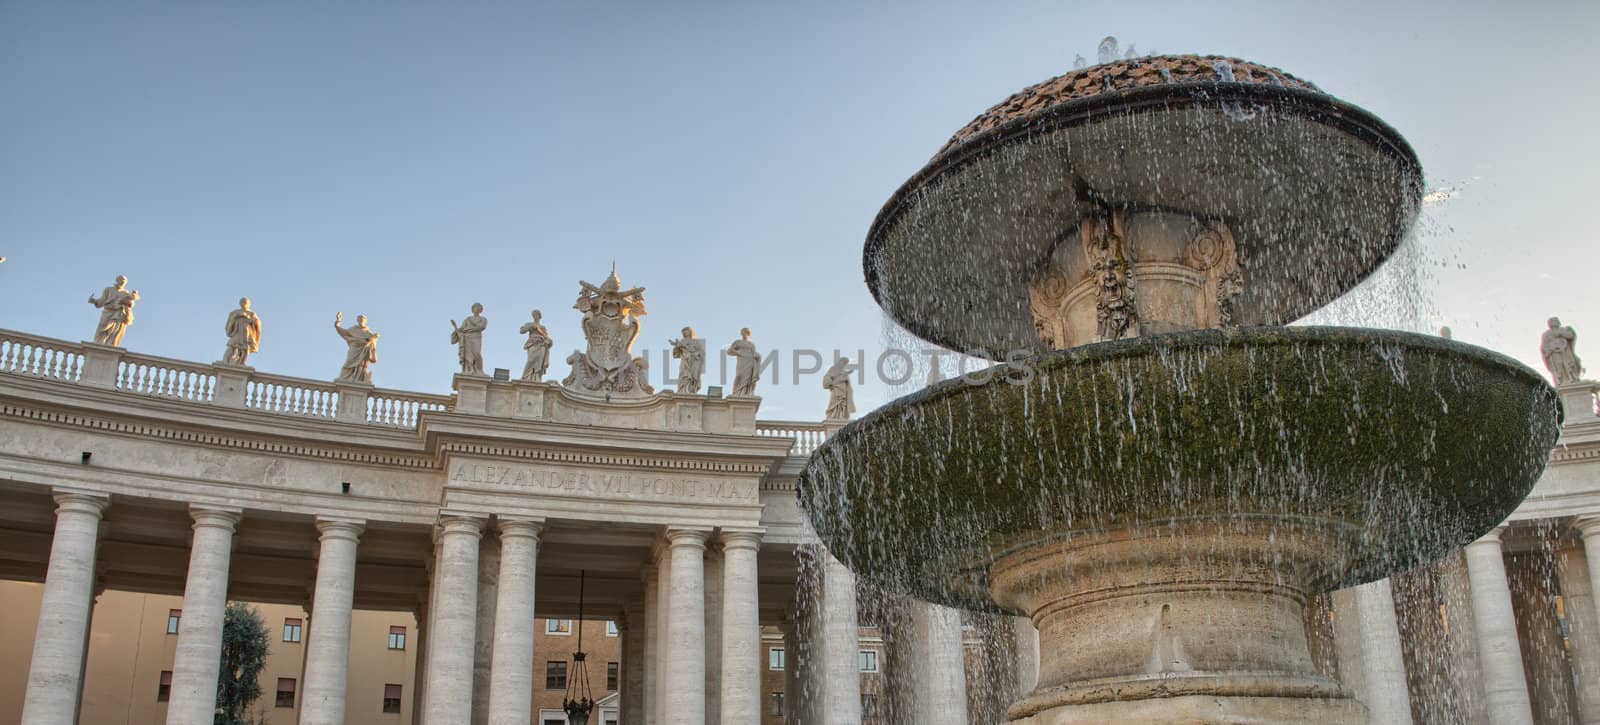 Fountain in Piazza San Pietro - St Peter Square - Rome by jovannig